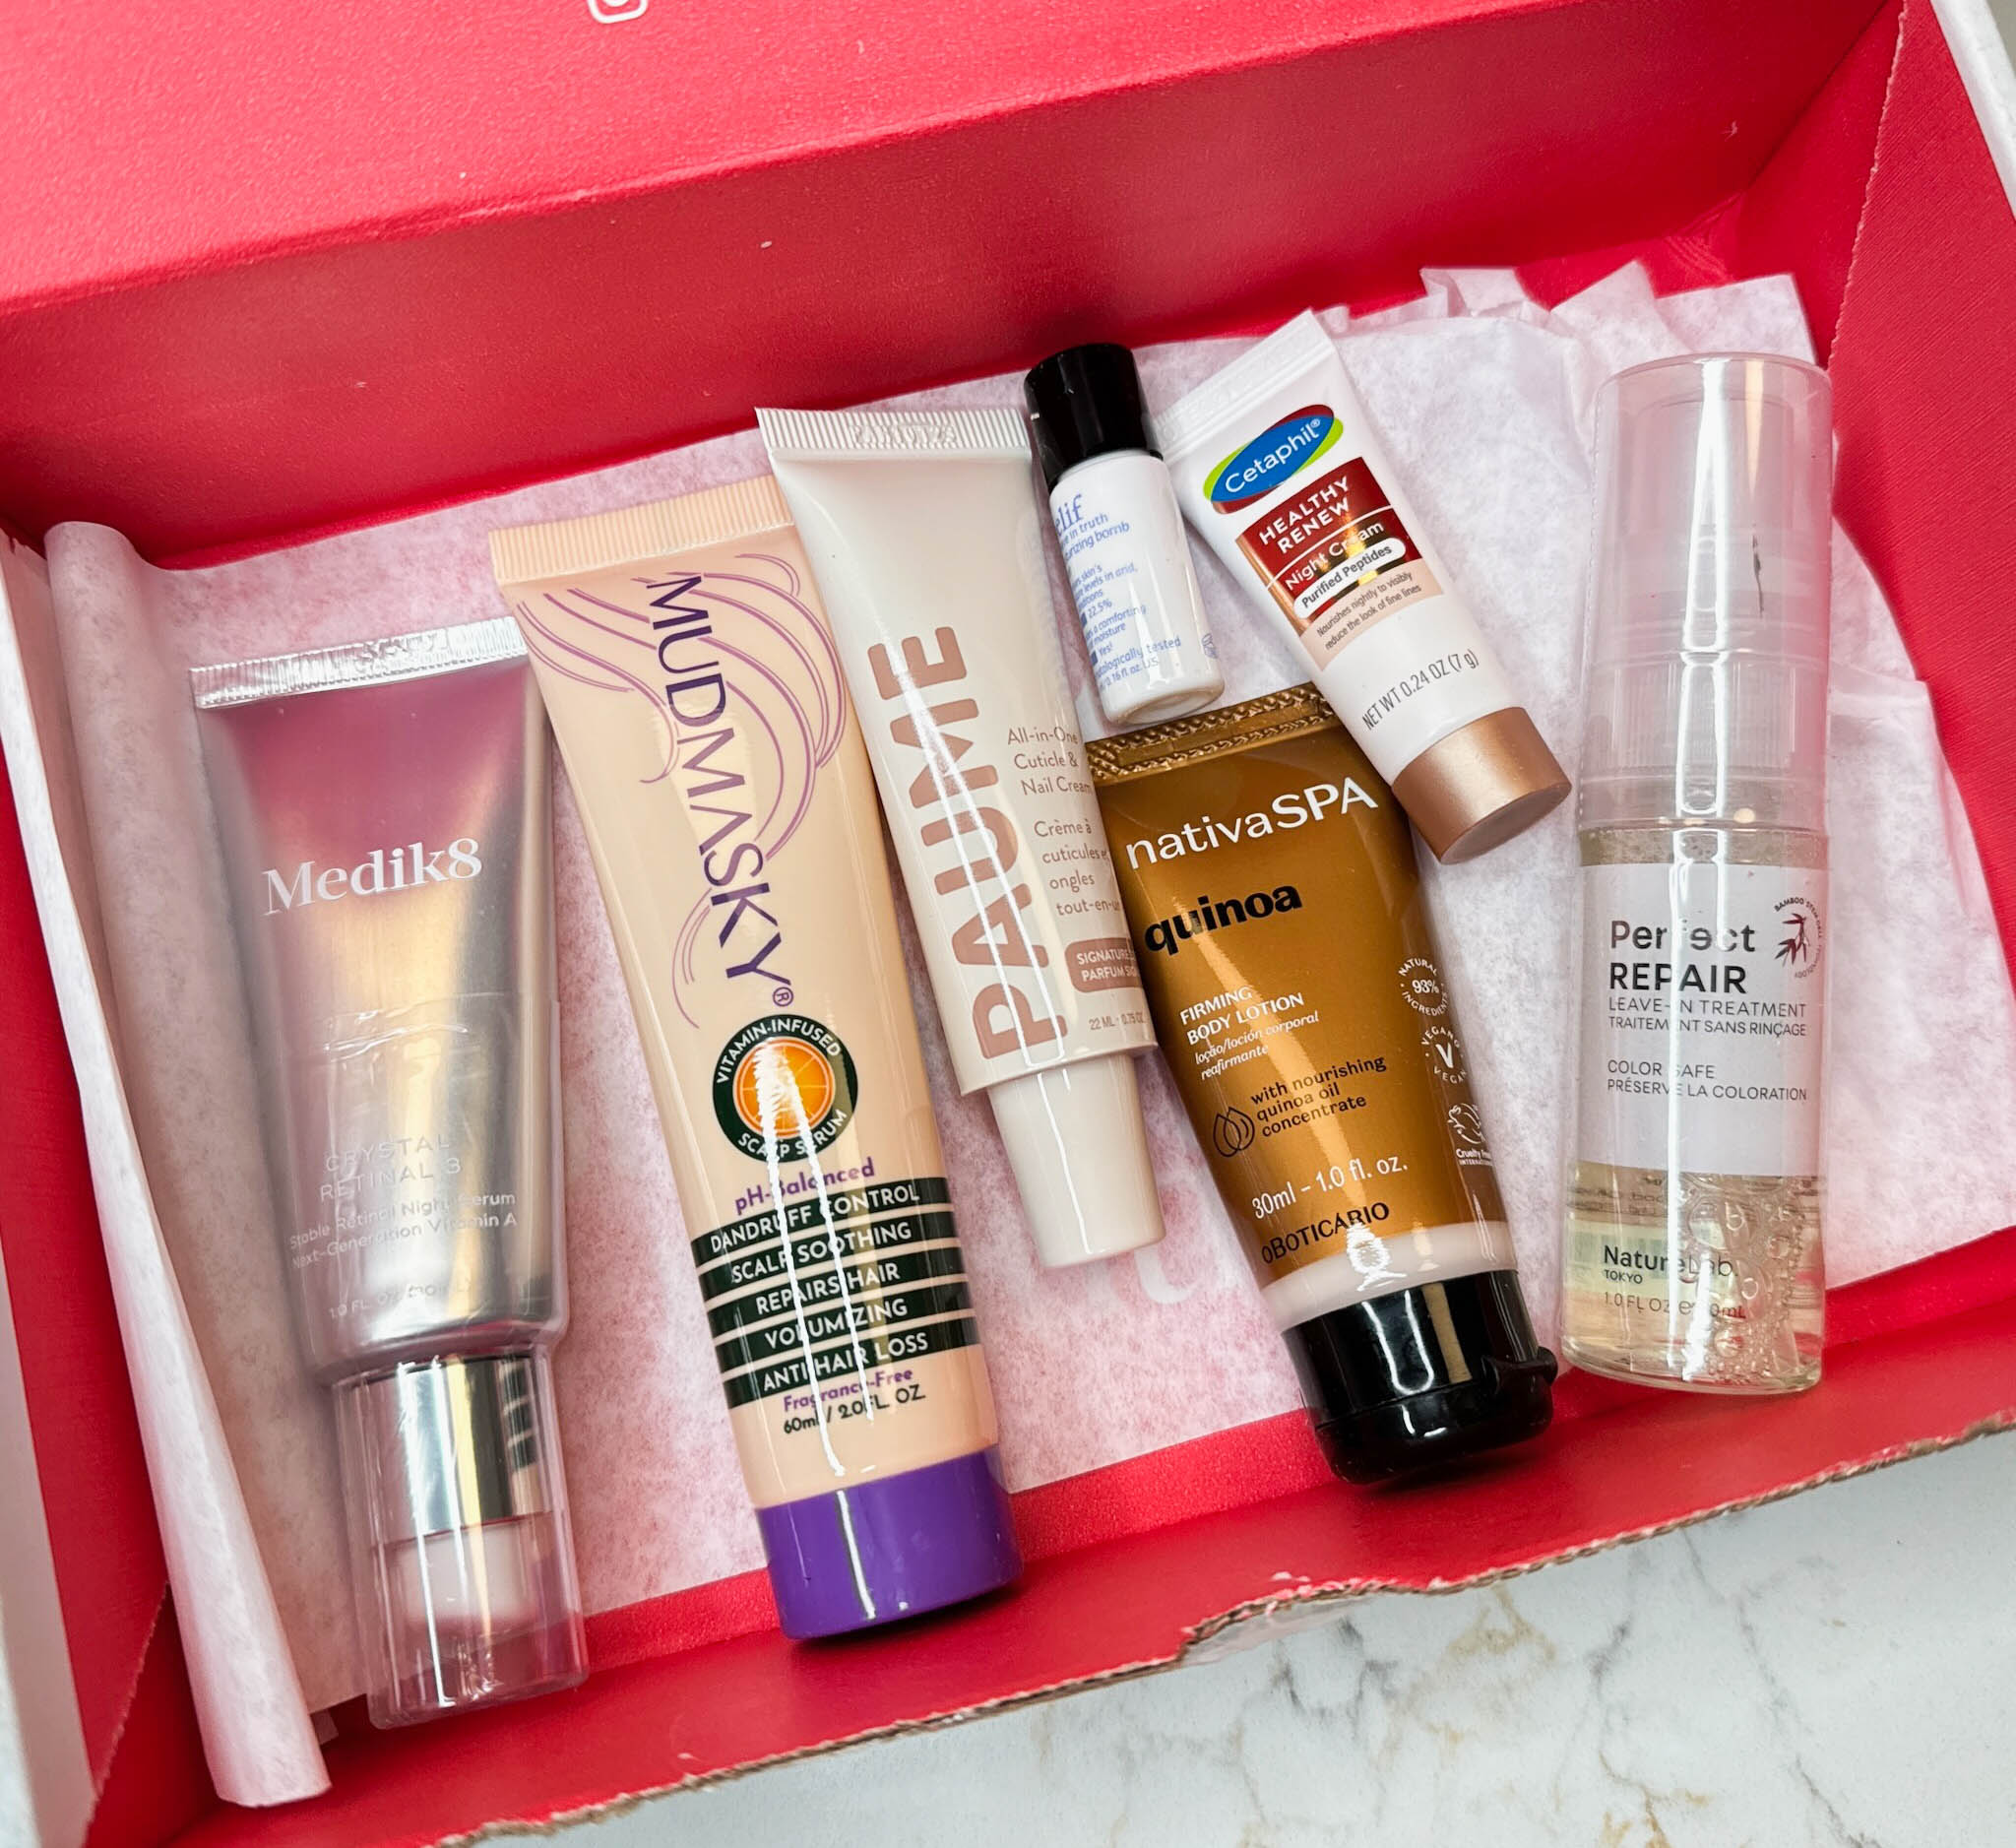 What Is Your Weather Beauty Box